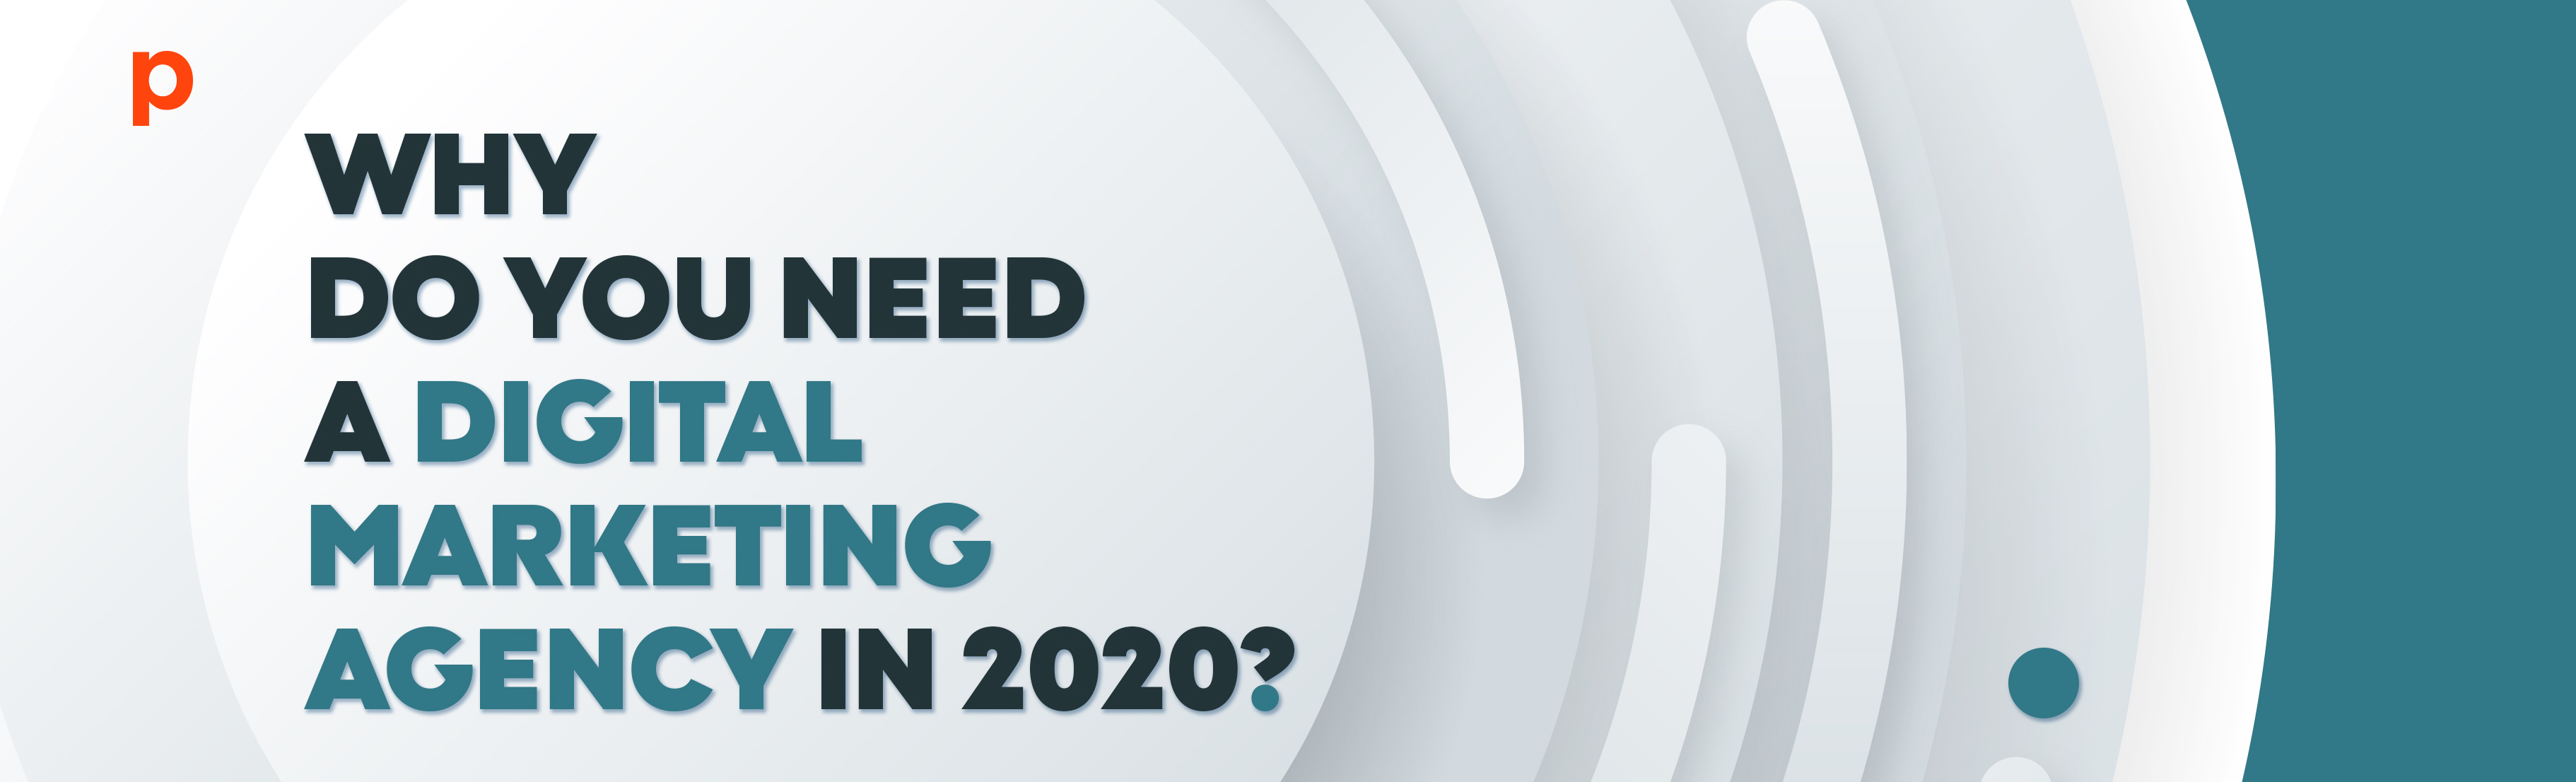 Why do you need a digital marketing agency in 2020?